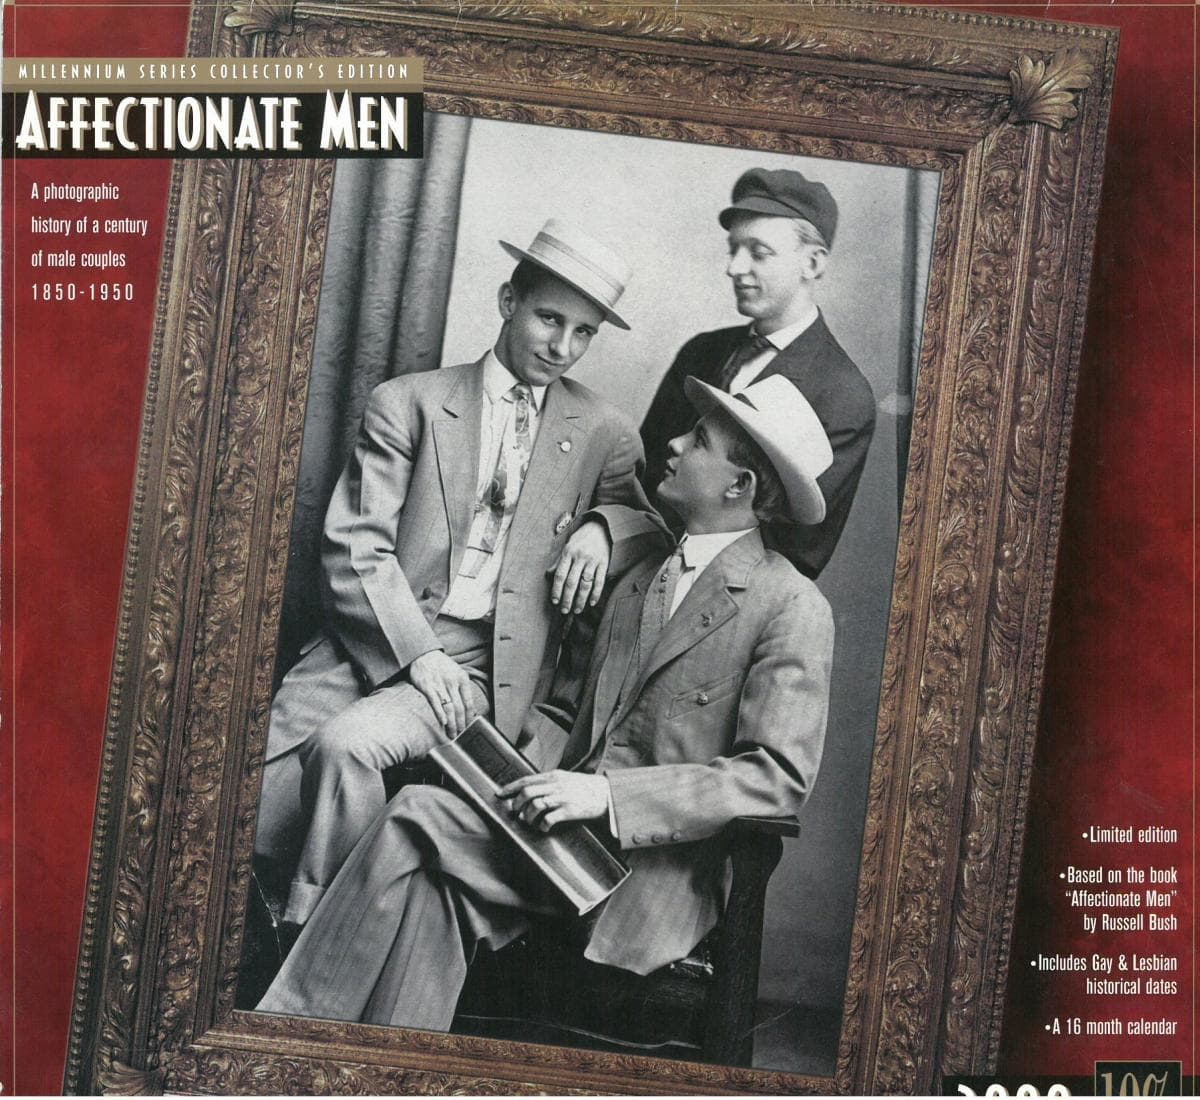 Affectionate Men: A photographic history of a century of male couples 1850-1950 – published in 2000 by 10% Productions, 6165 Santa Monica Blvd., Los Angeles, CA 90038